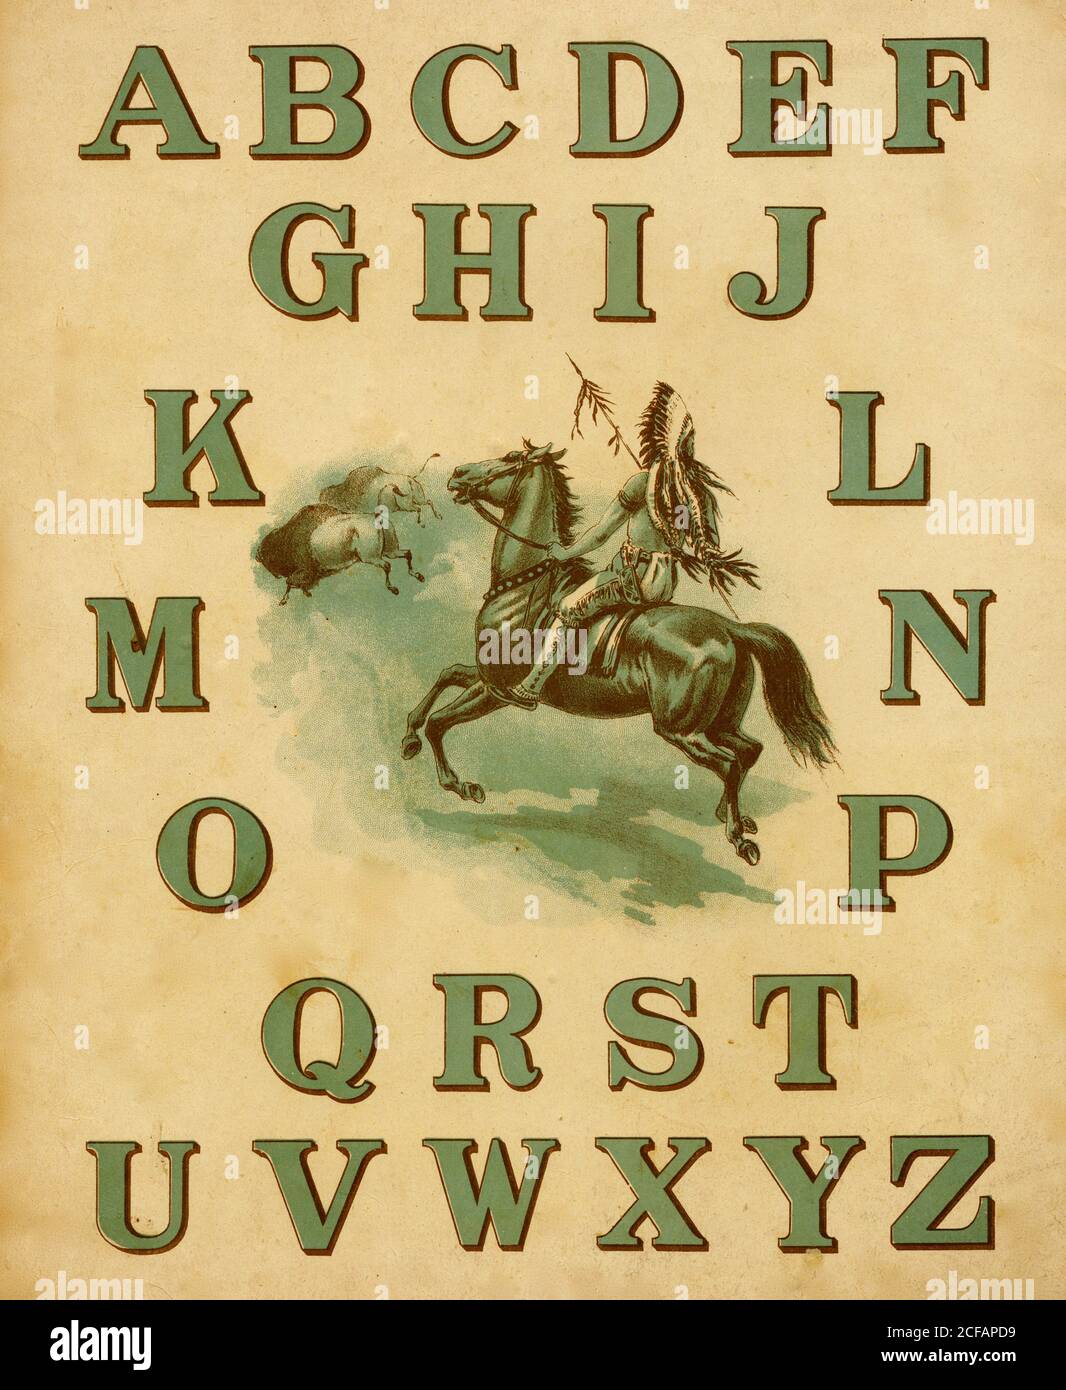 Railroad ABC Indian mounted on horse with full alphabet Stock Photo